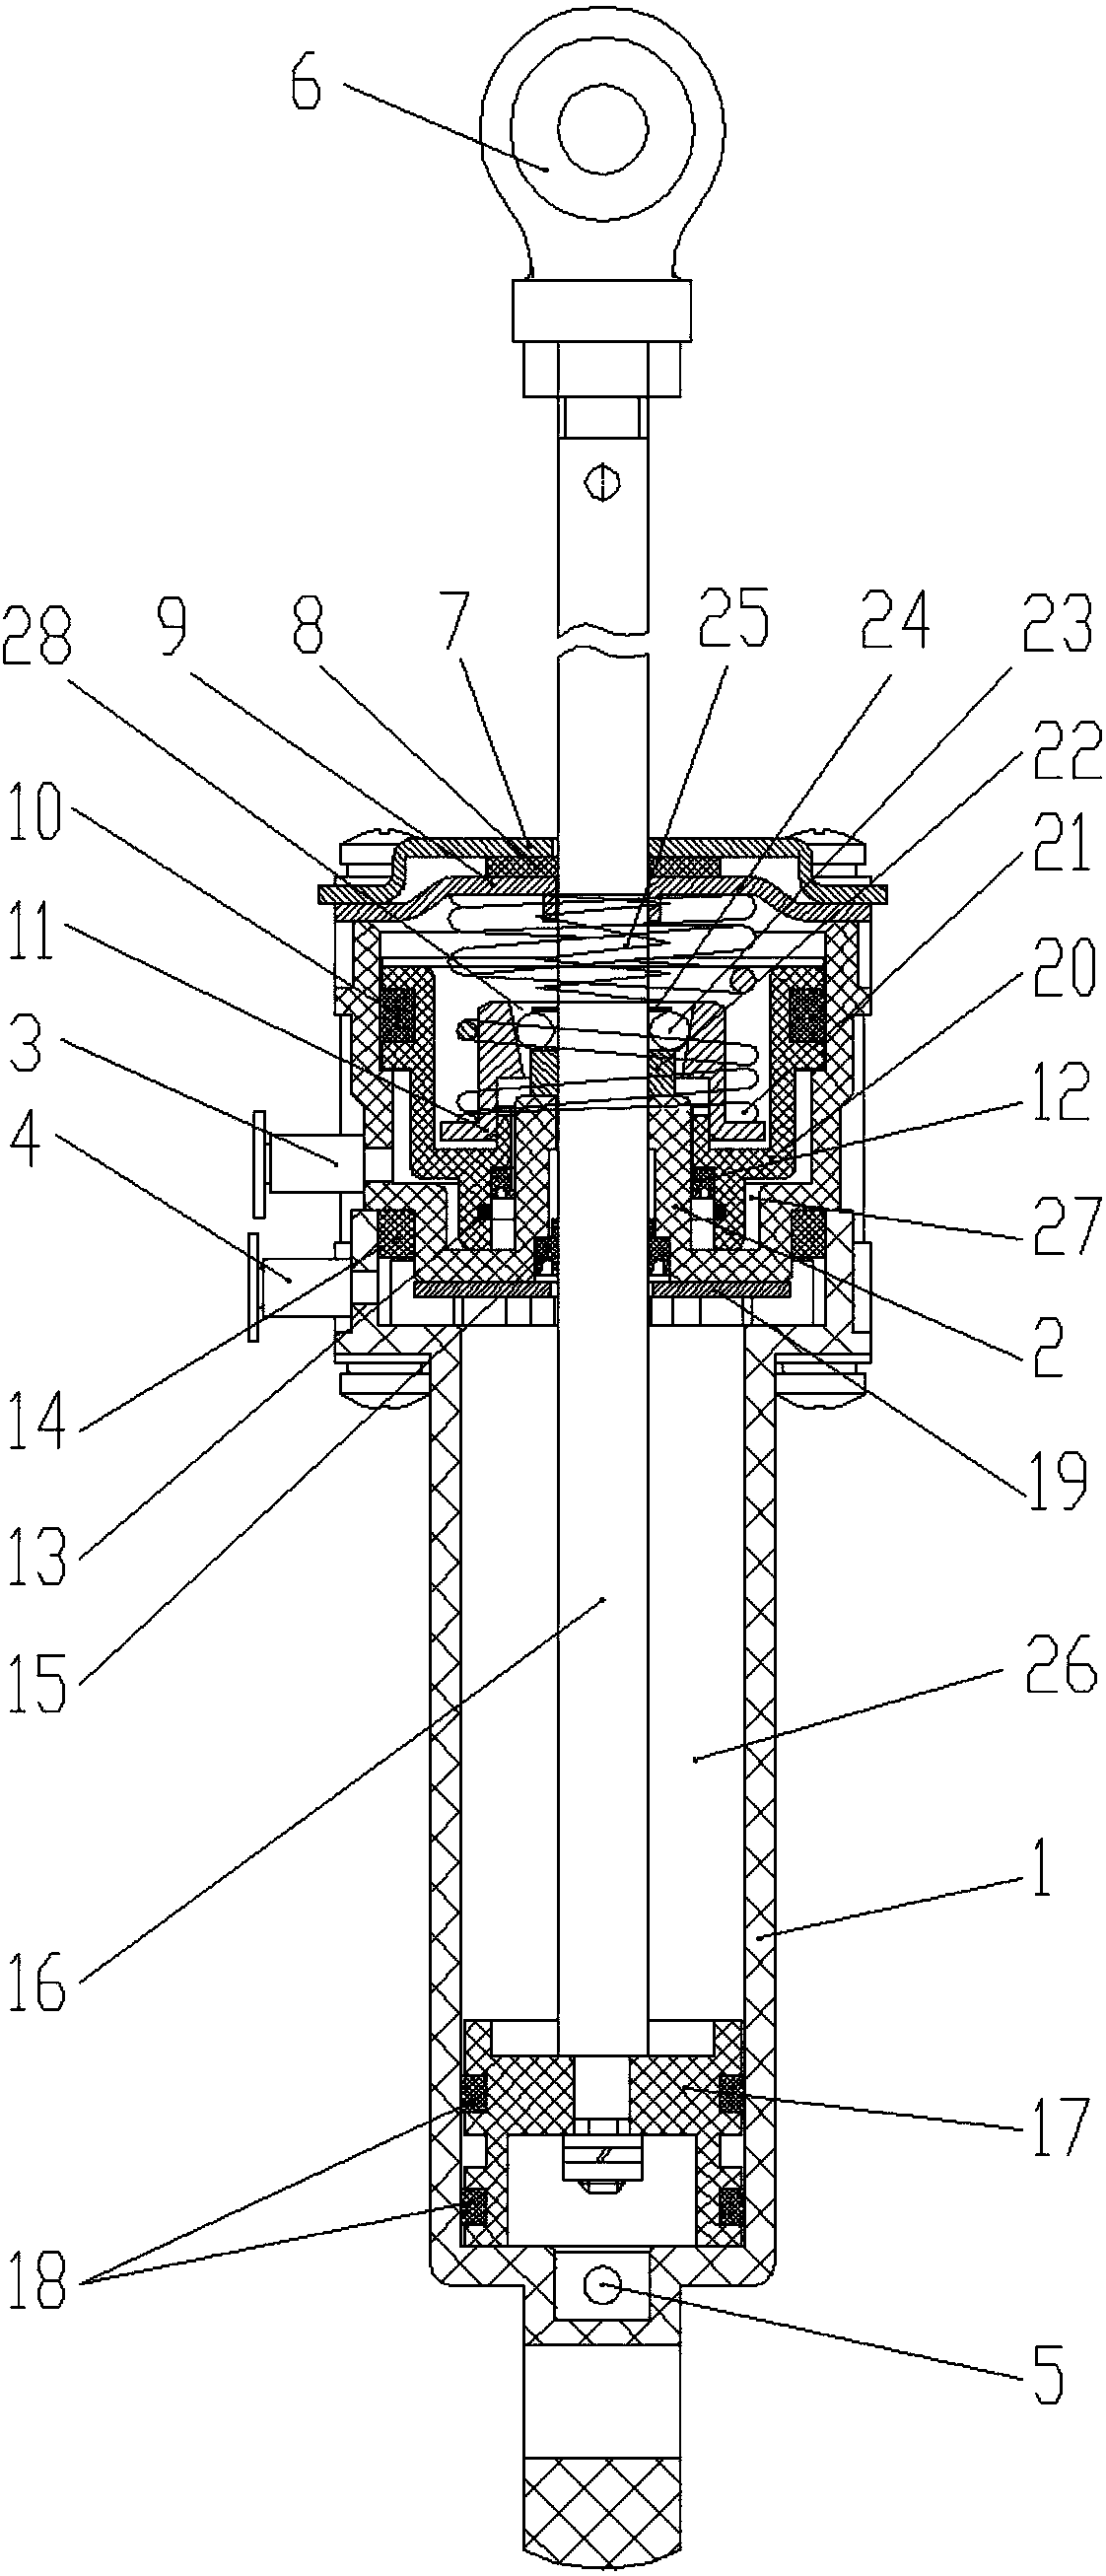 Compound cylinder for controlling lifting of winding cradleofspinning machine